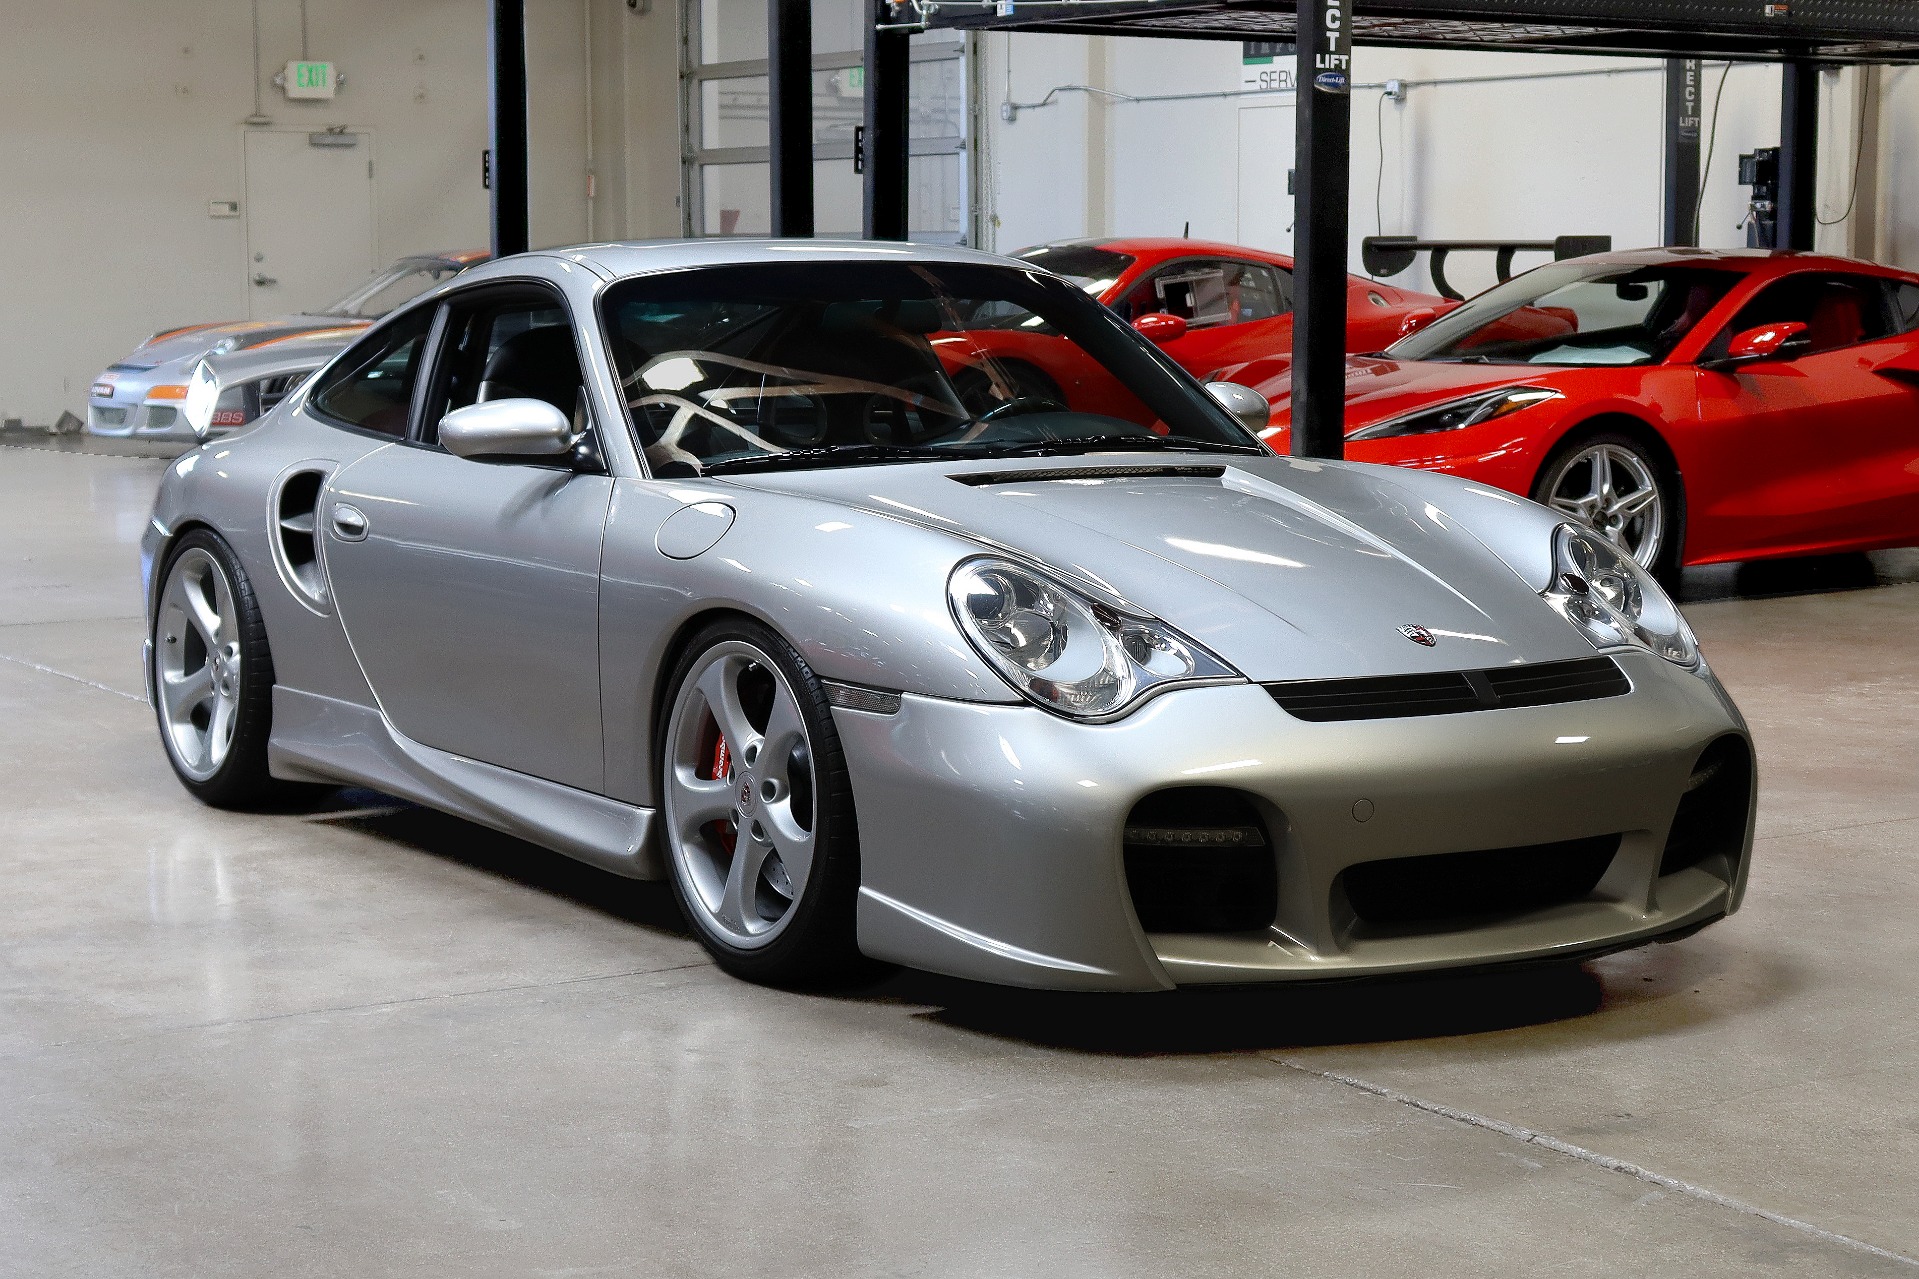 Used 2001 Porsche 911 turbo Turbo for sale Sold at San Francisco Sports Cars in San Carlos CA 94070 1